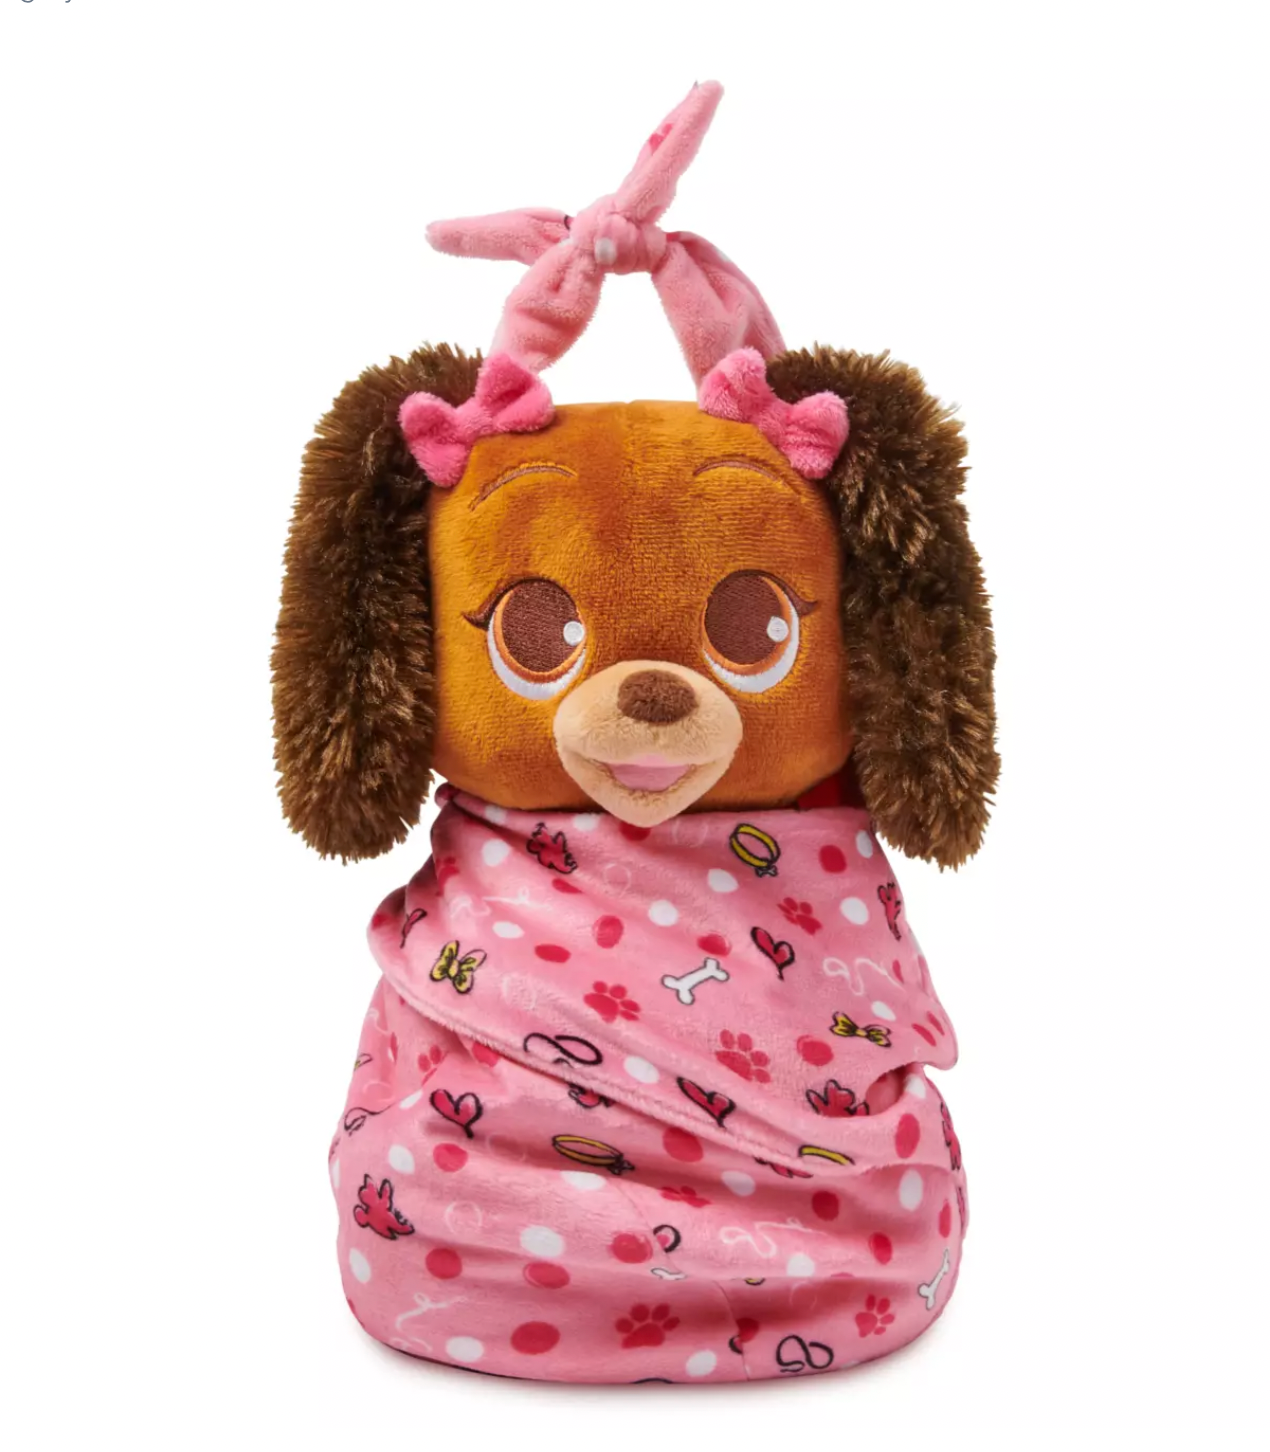 Disney Parks Minnie's Dog Fifi in a Blanket Pouch Plush New with Tags